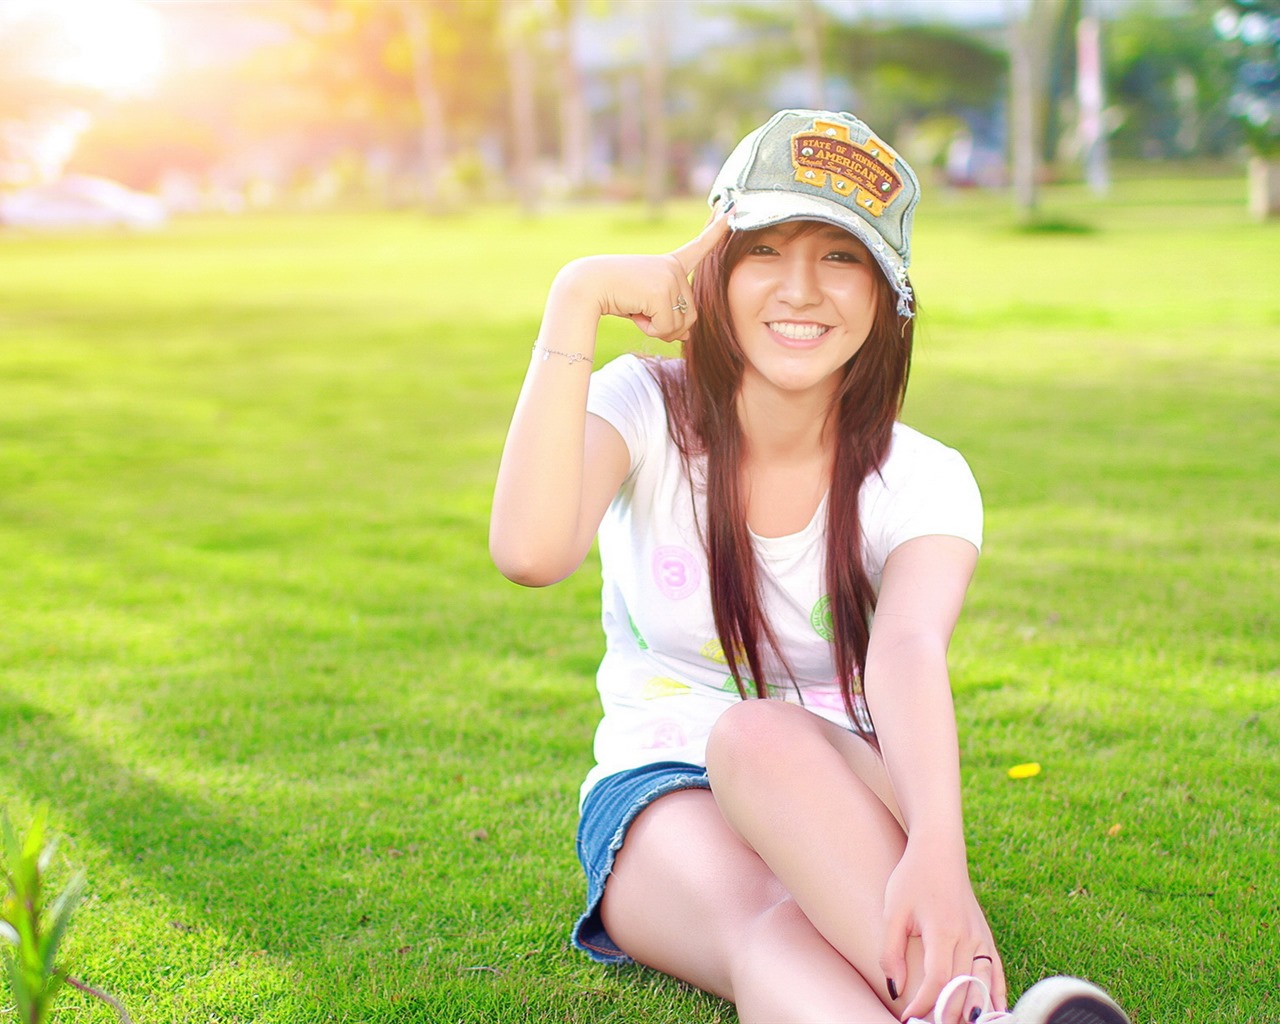 Pure and lovely young Asian girl HD wallpapers collection (5) #36 - 1280x1024